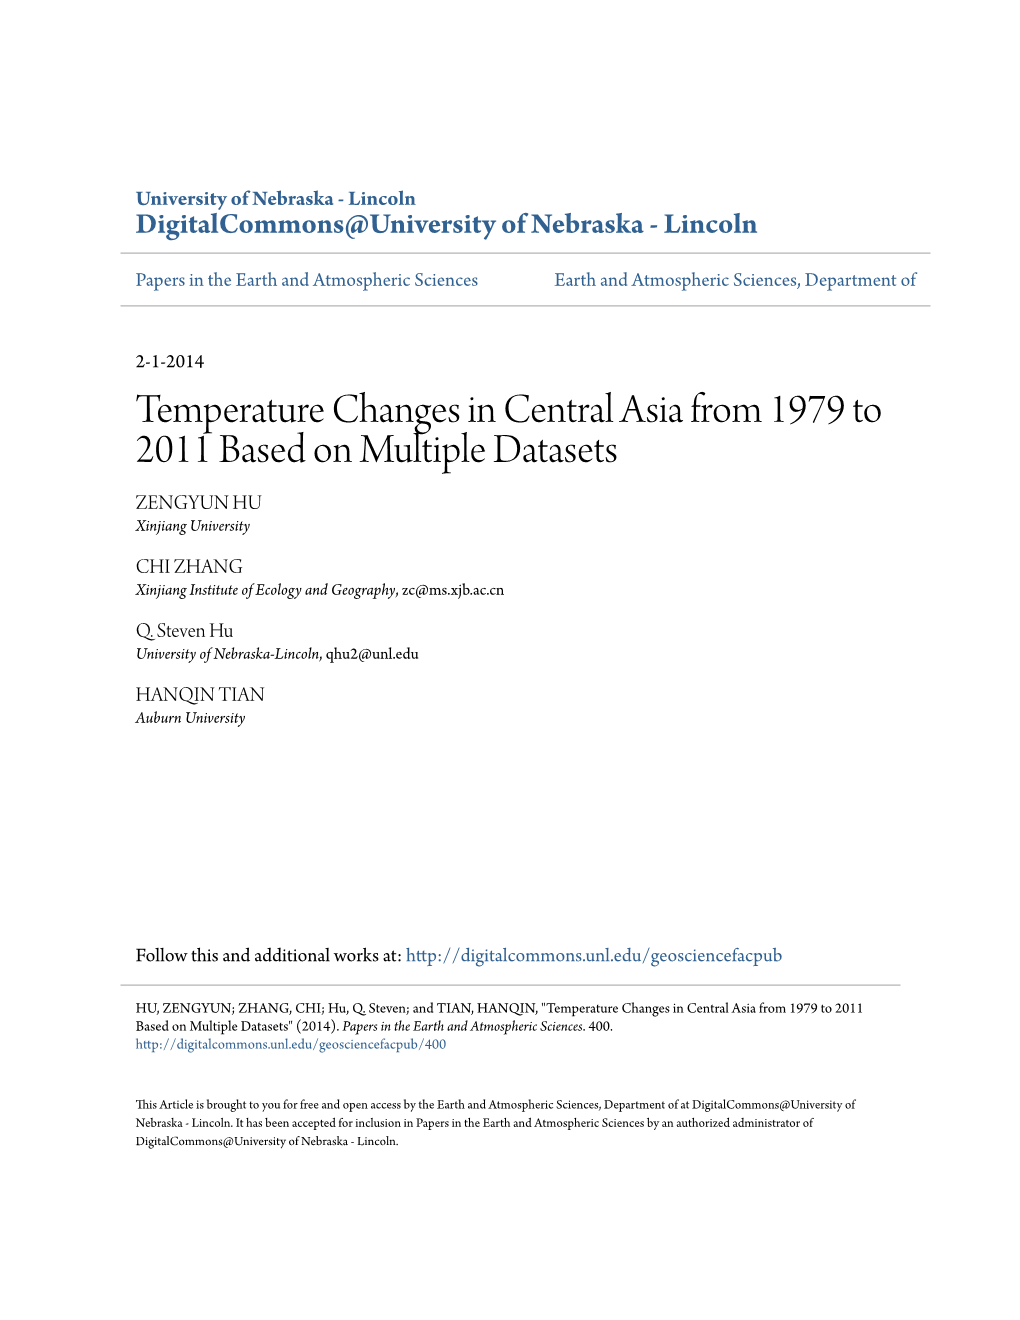 Temperature Changes in Central Asia from 1979 to 2011 Based on Multiple Datasets ZENGYUN HU Xinjiang University